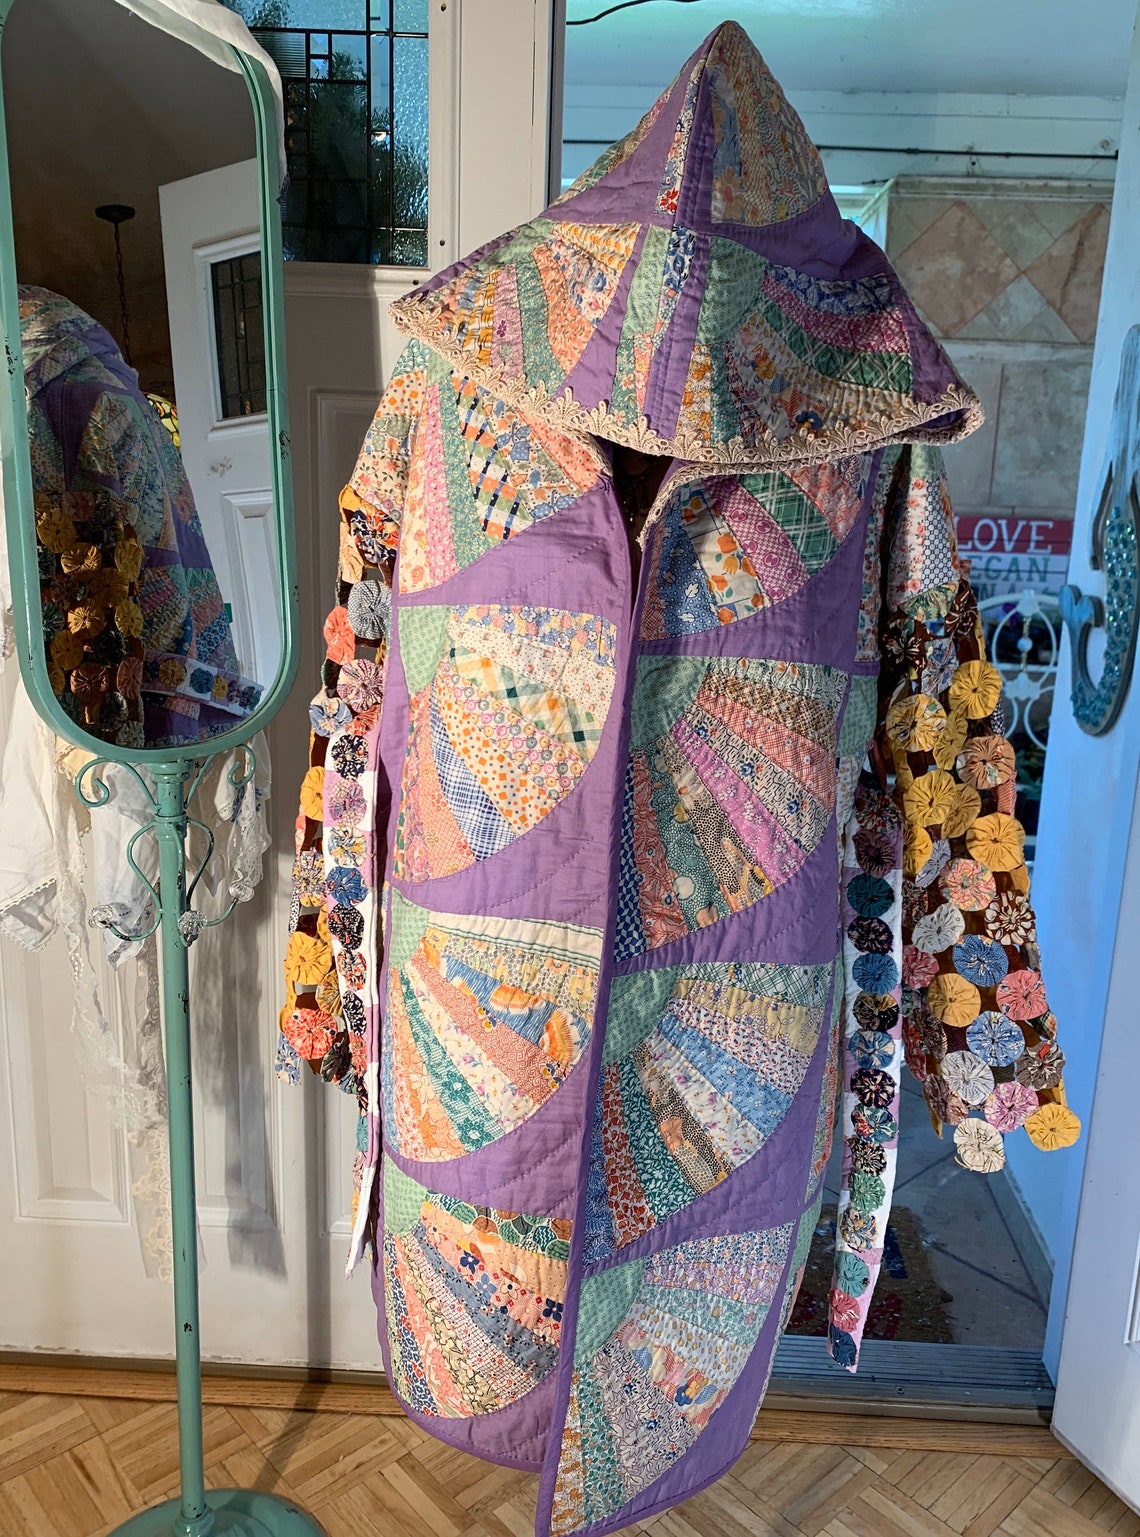 Medium Vintage Upcycled quilt coat with hood created from hand | Etsy